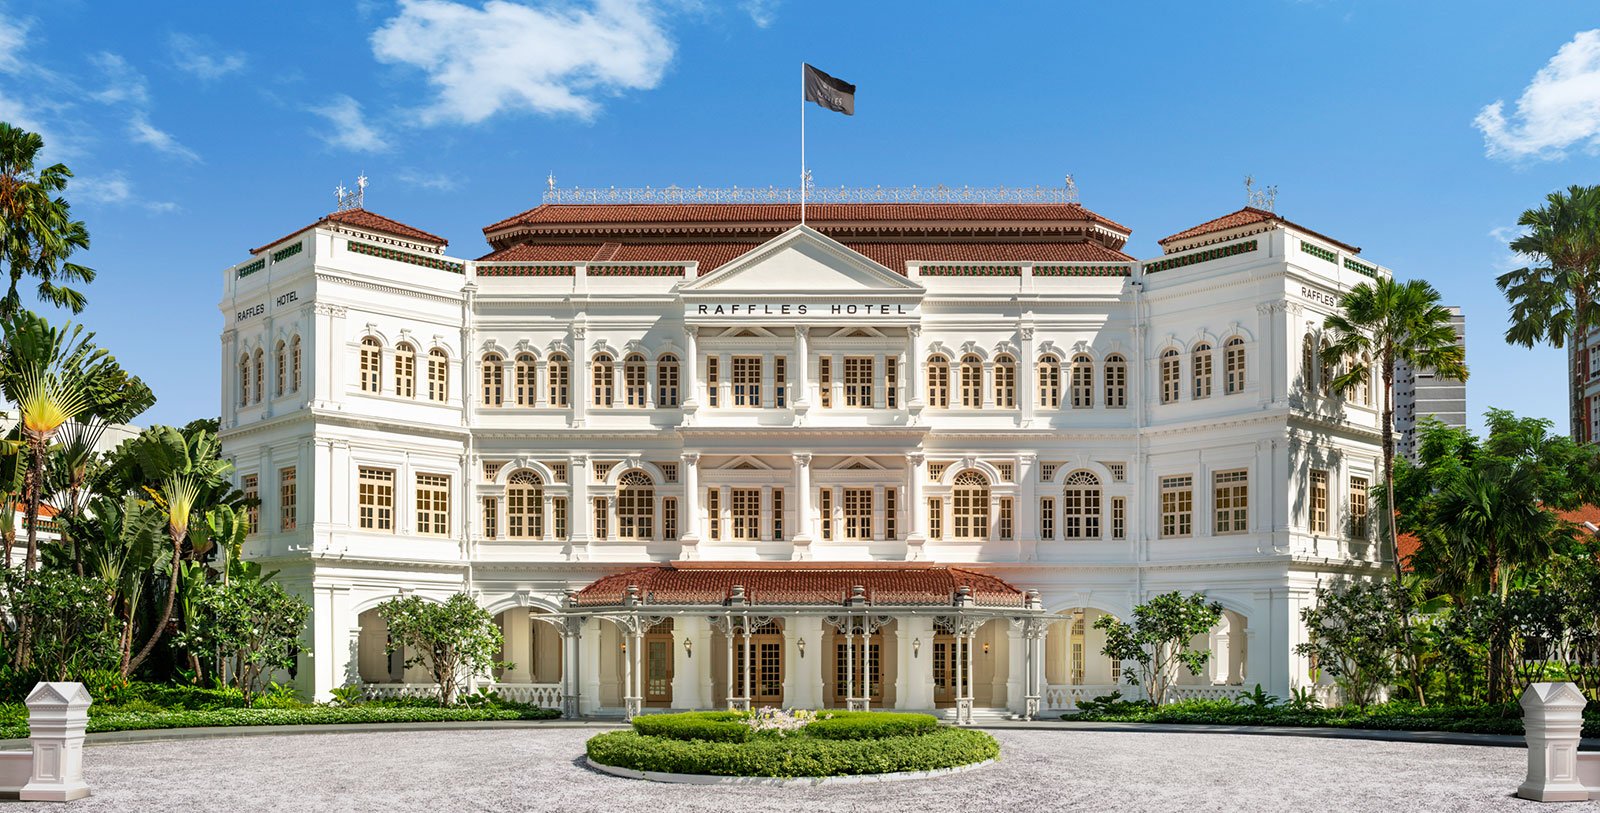 Image of Hotel Exterior Raffles Singapore, 1887, Member of Historic Hotels Worldwide, in Singapore, Overview